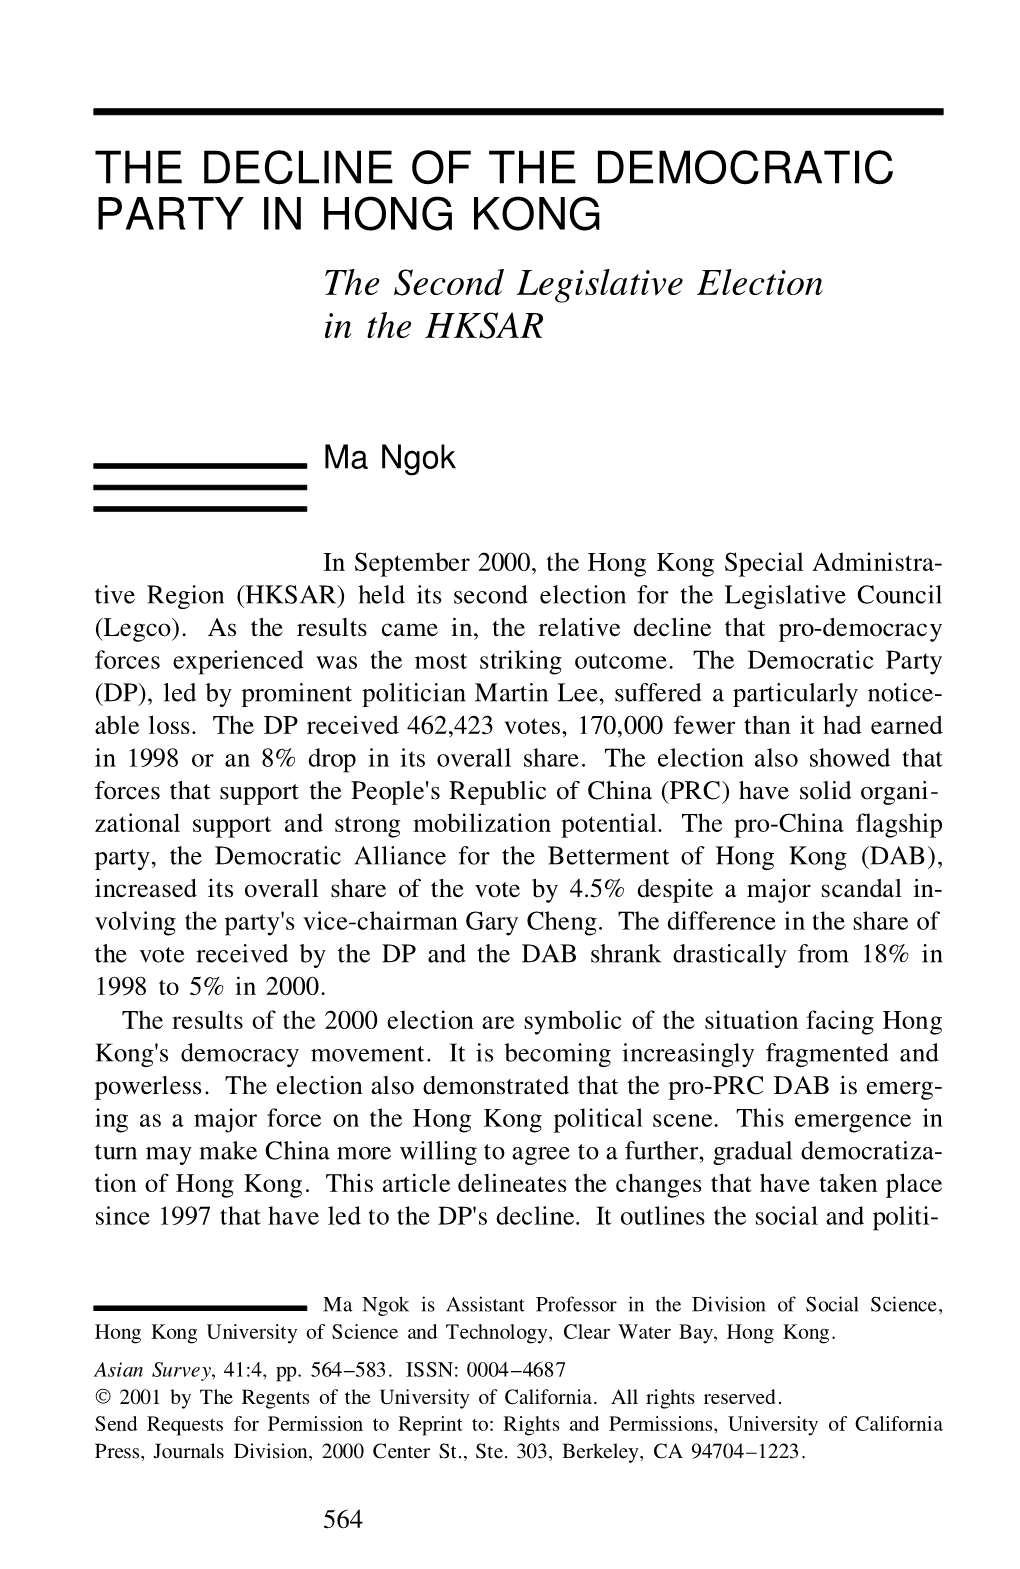 THE DECLINE of the DEMOCRATIC PARTY in HONG KONG the Second Legislative Election in the HKSAR